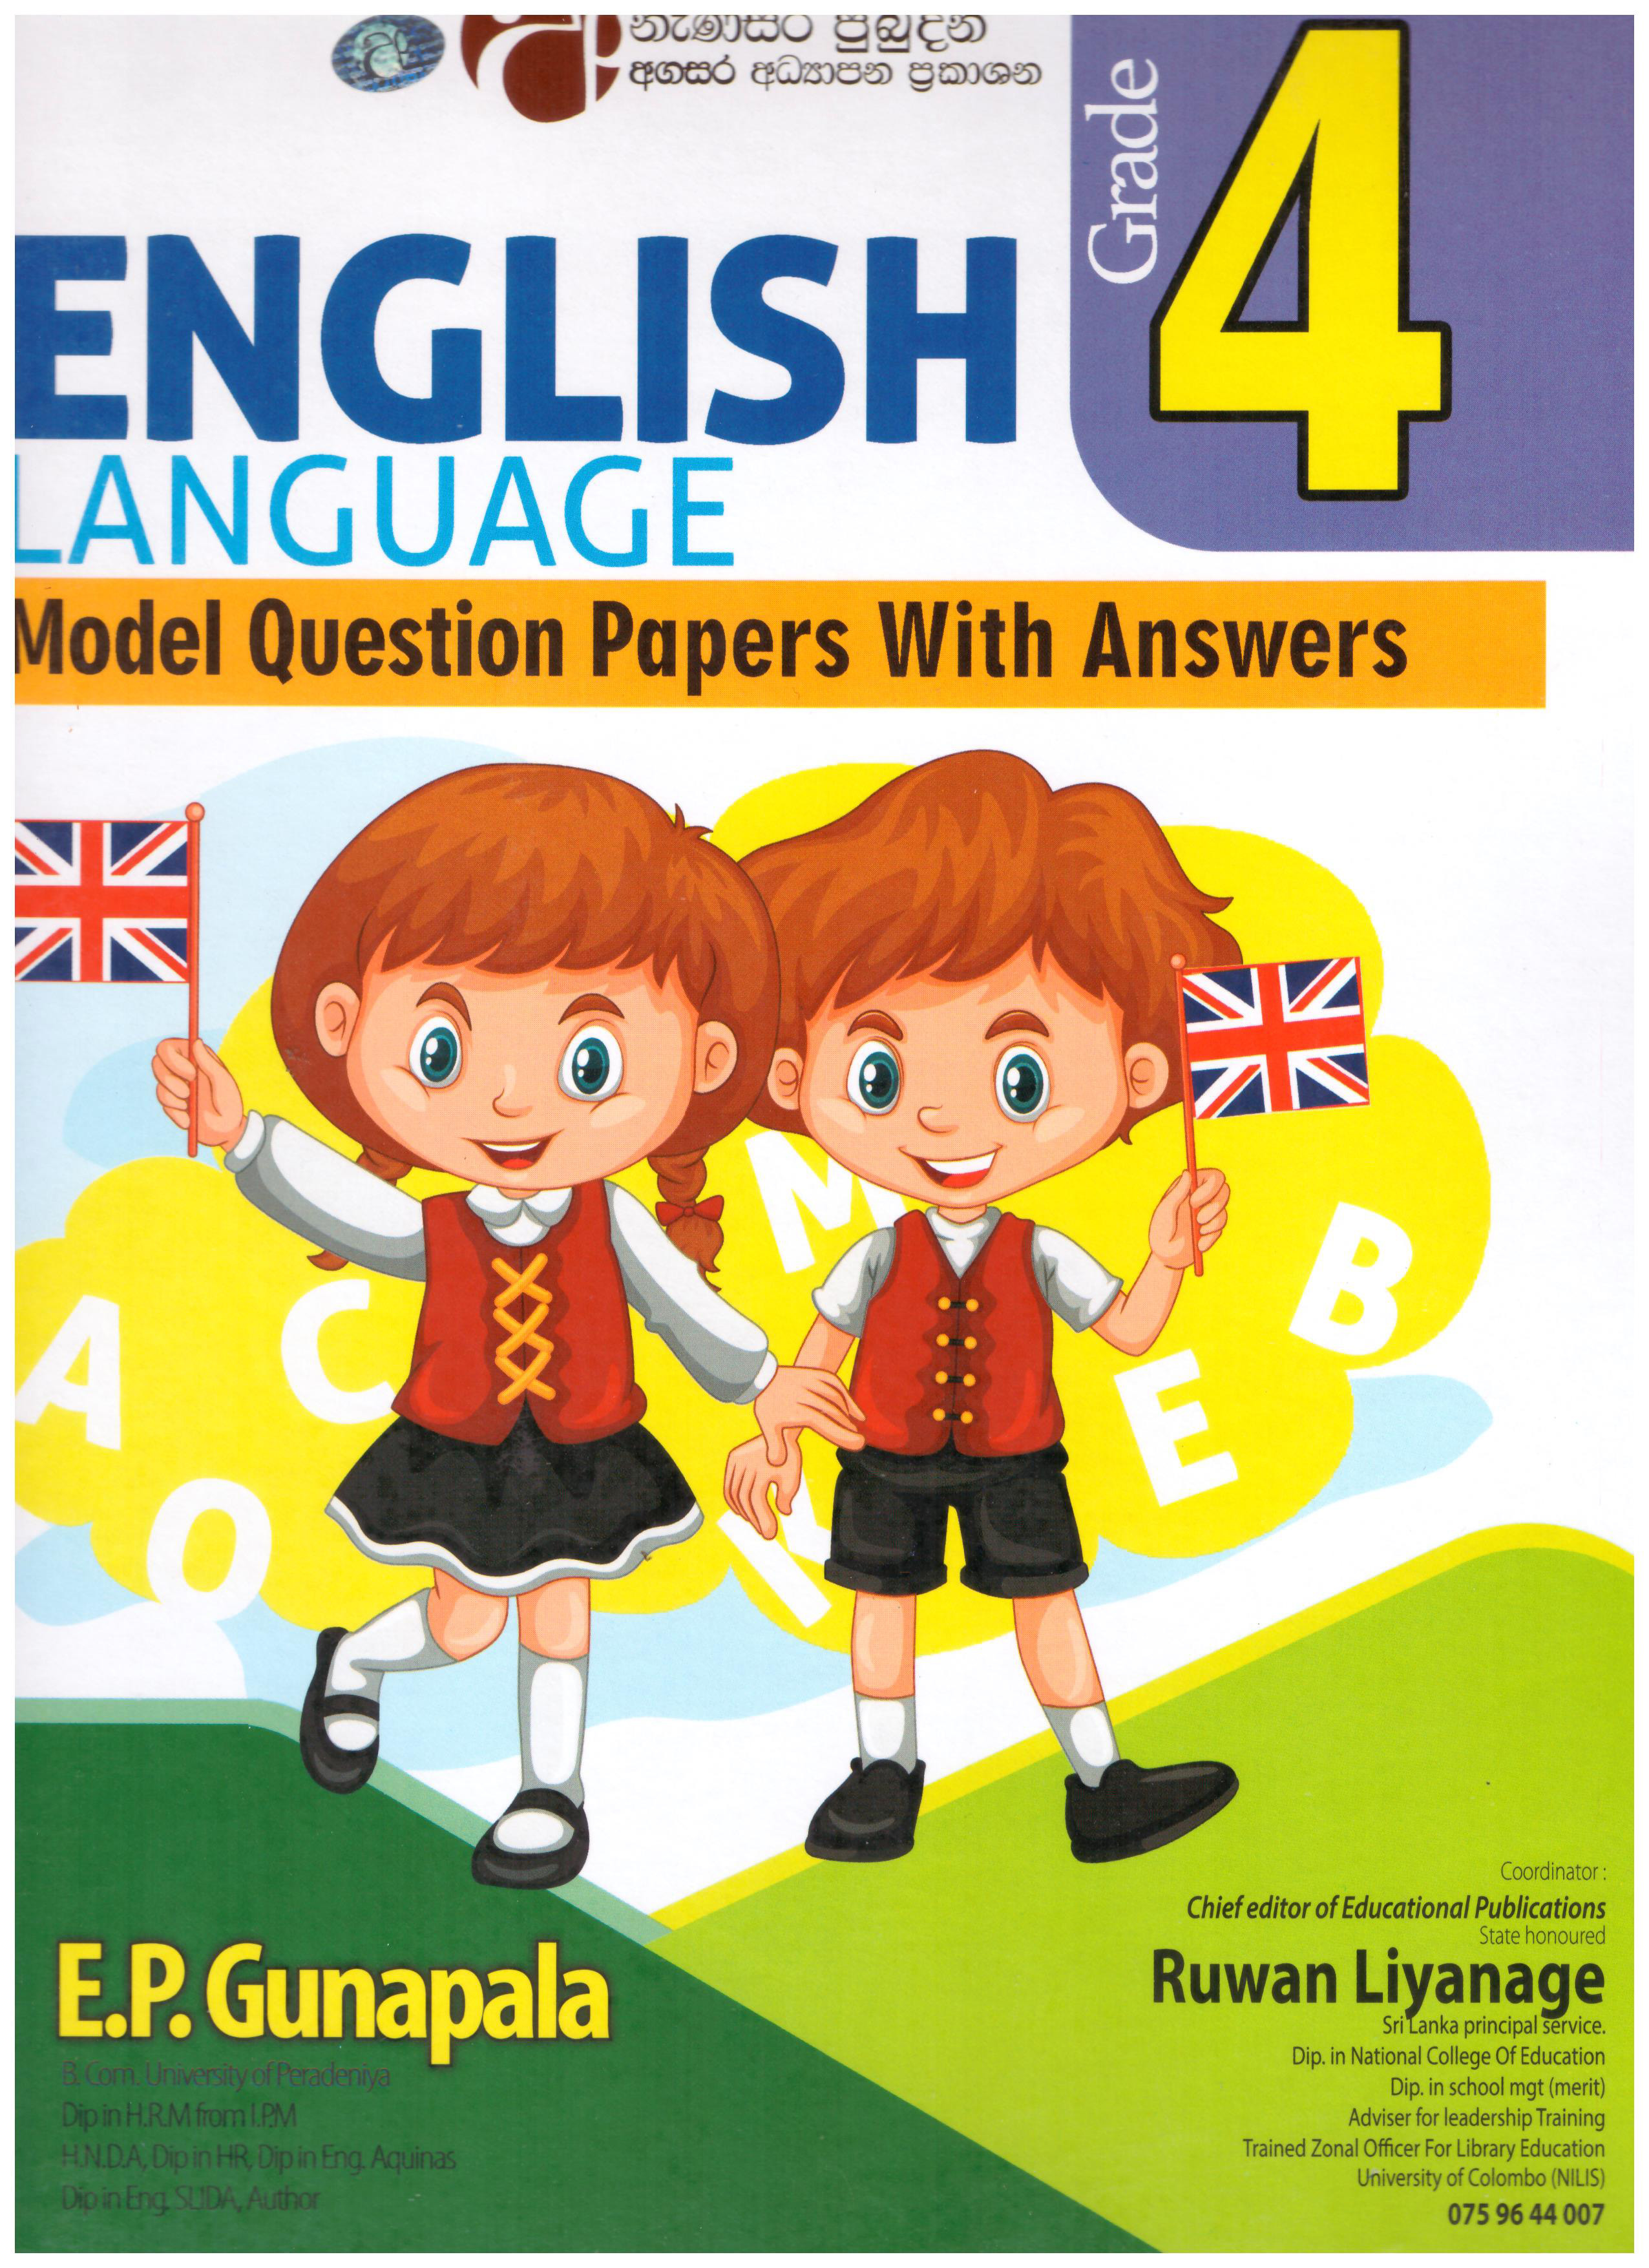 Grade 4 English Language Model Question Papers with Answers